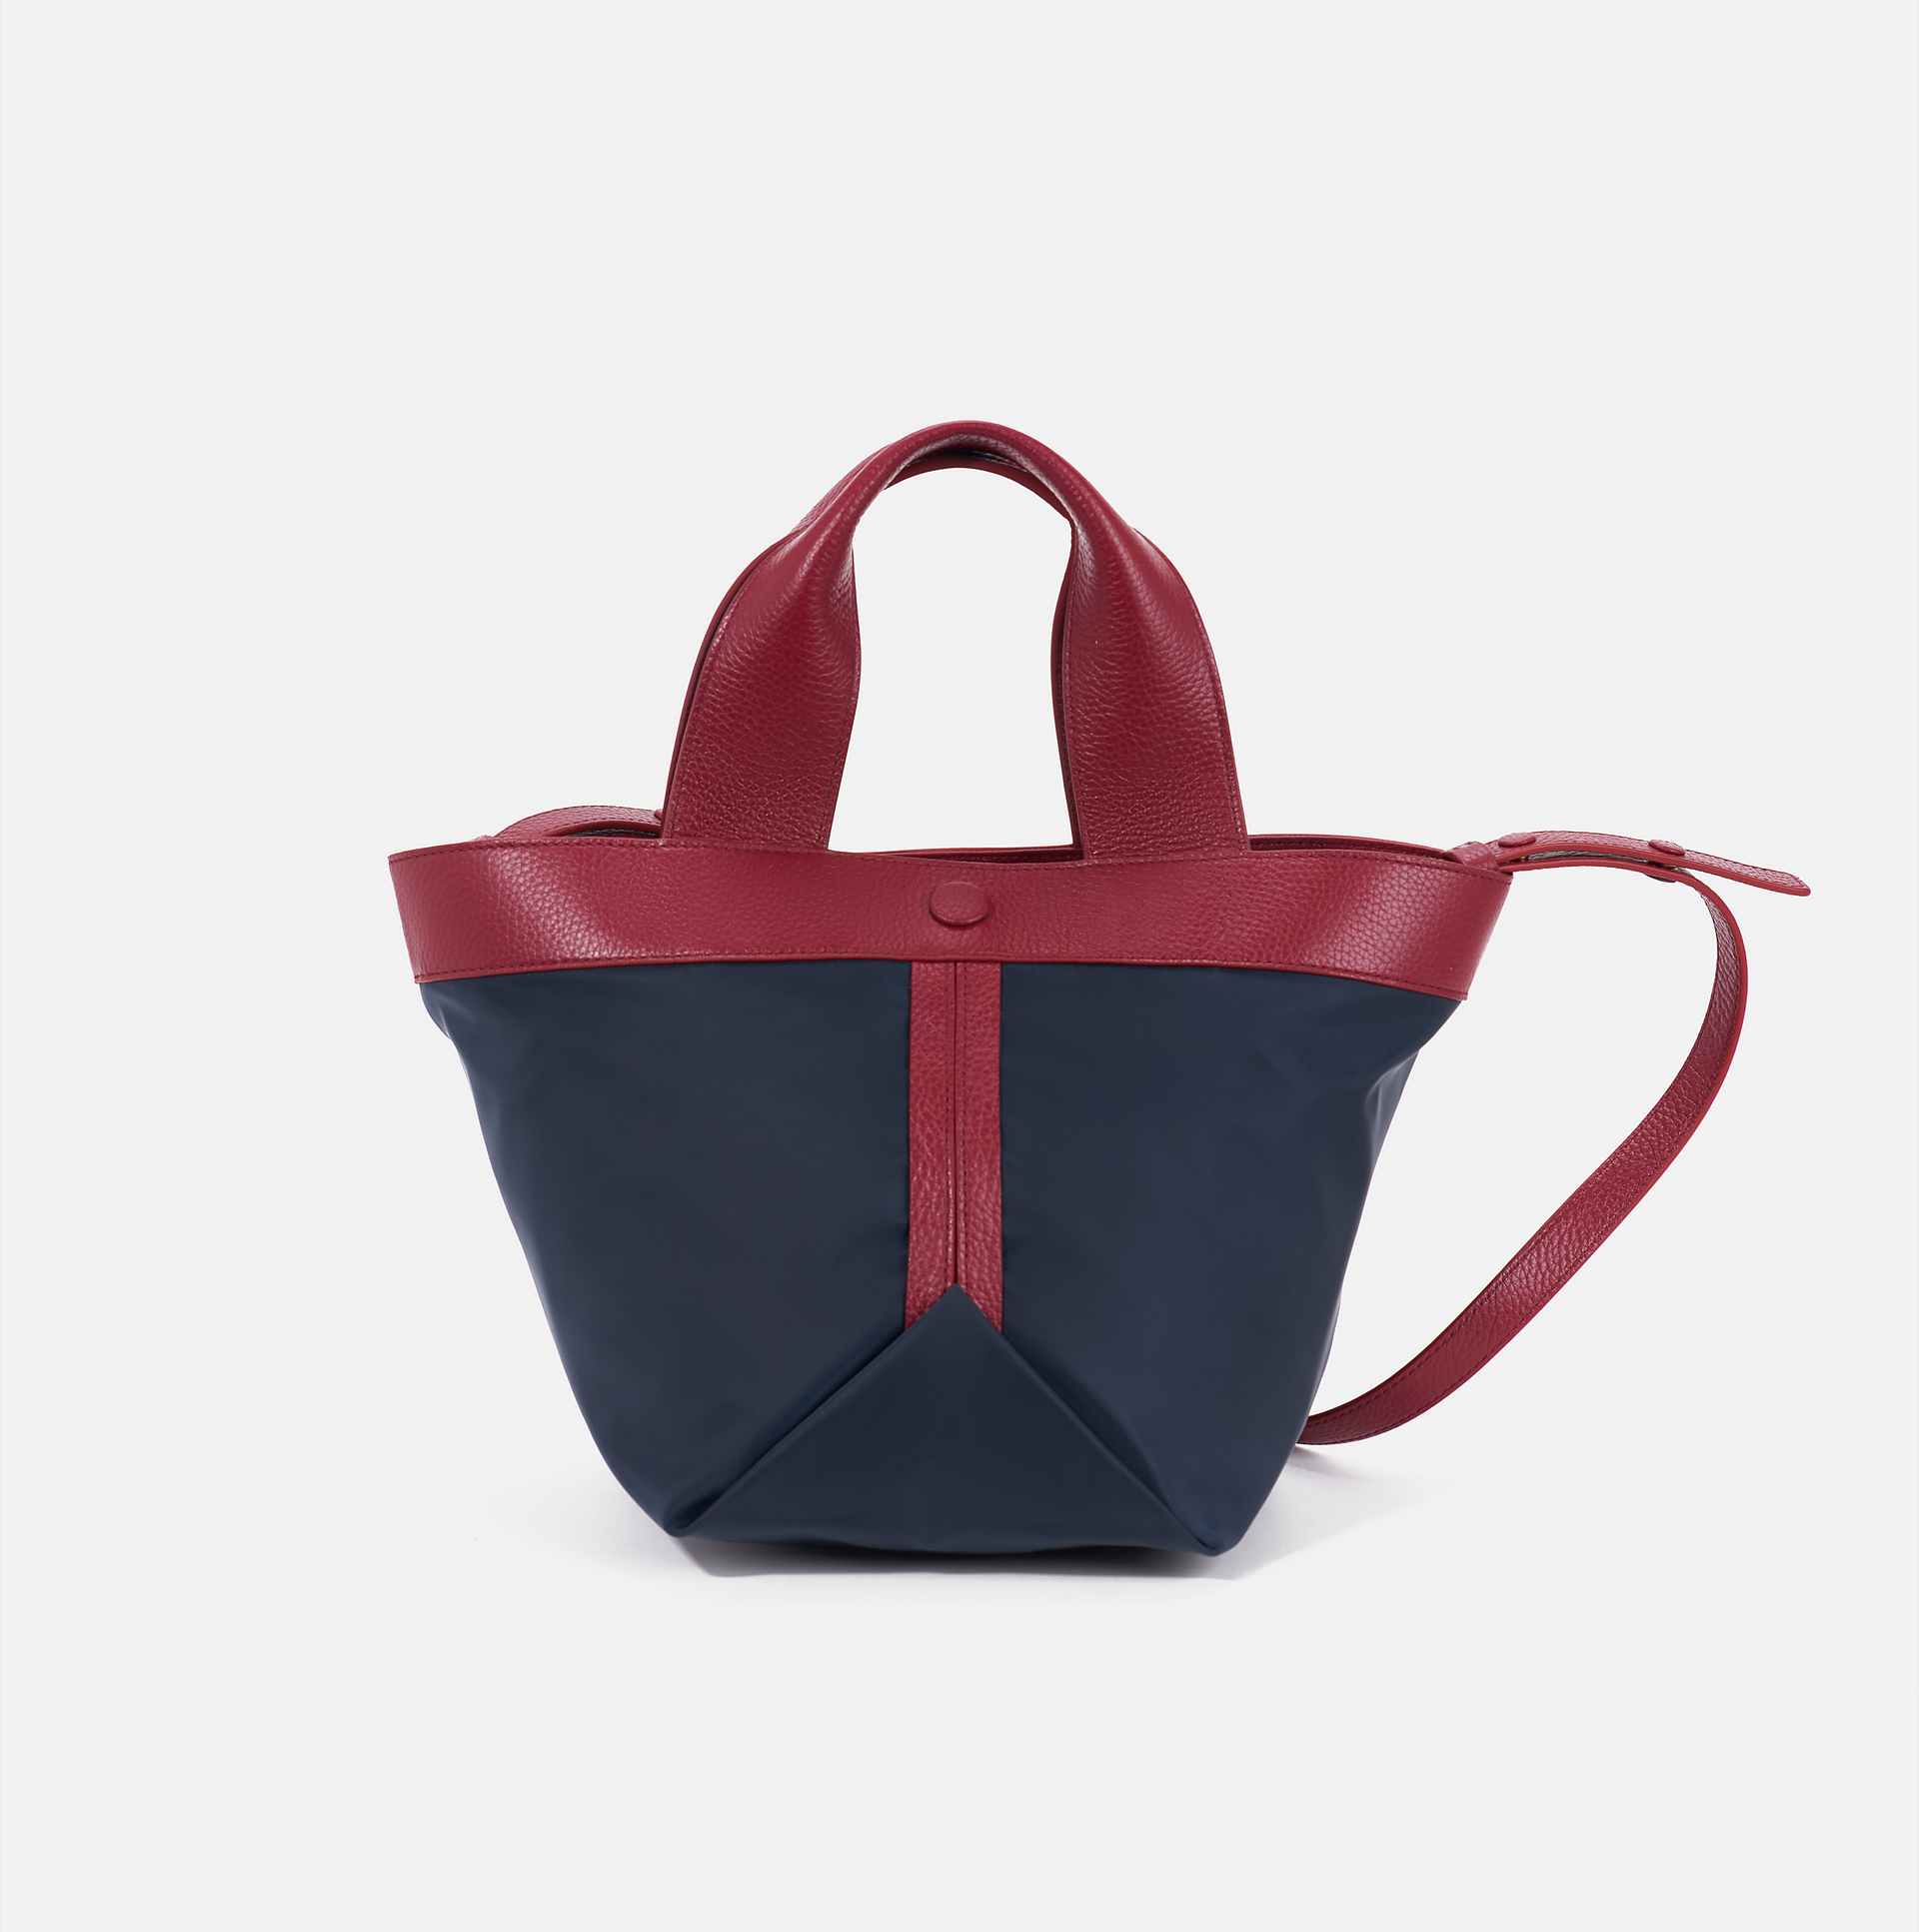 Gusset medium nylon tote with pebble leather trim in navy / burgundy